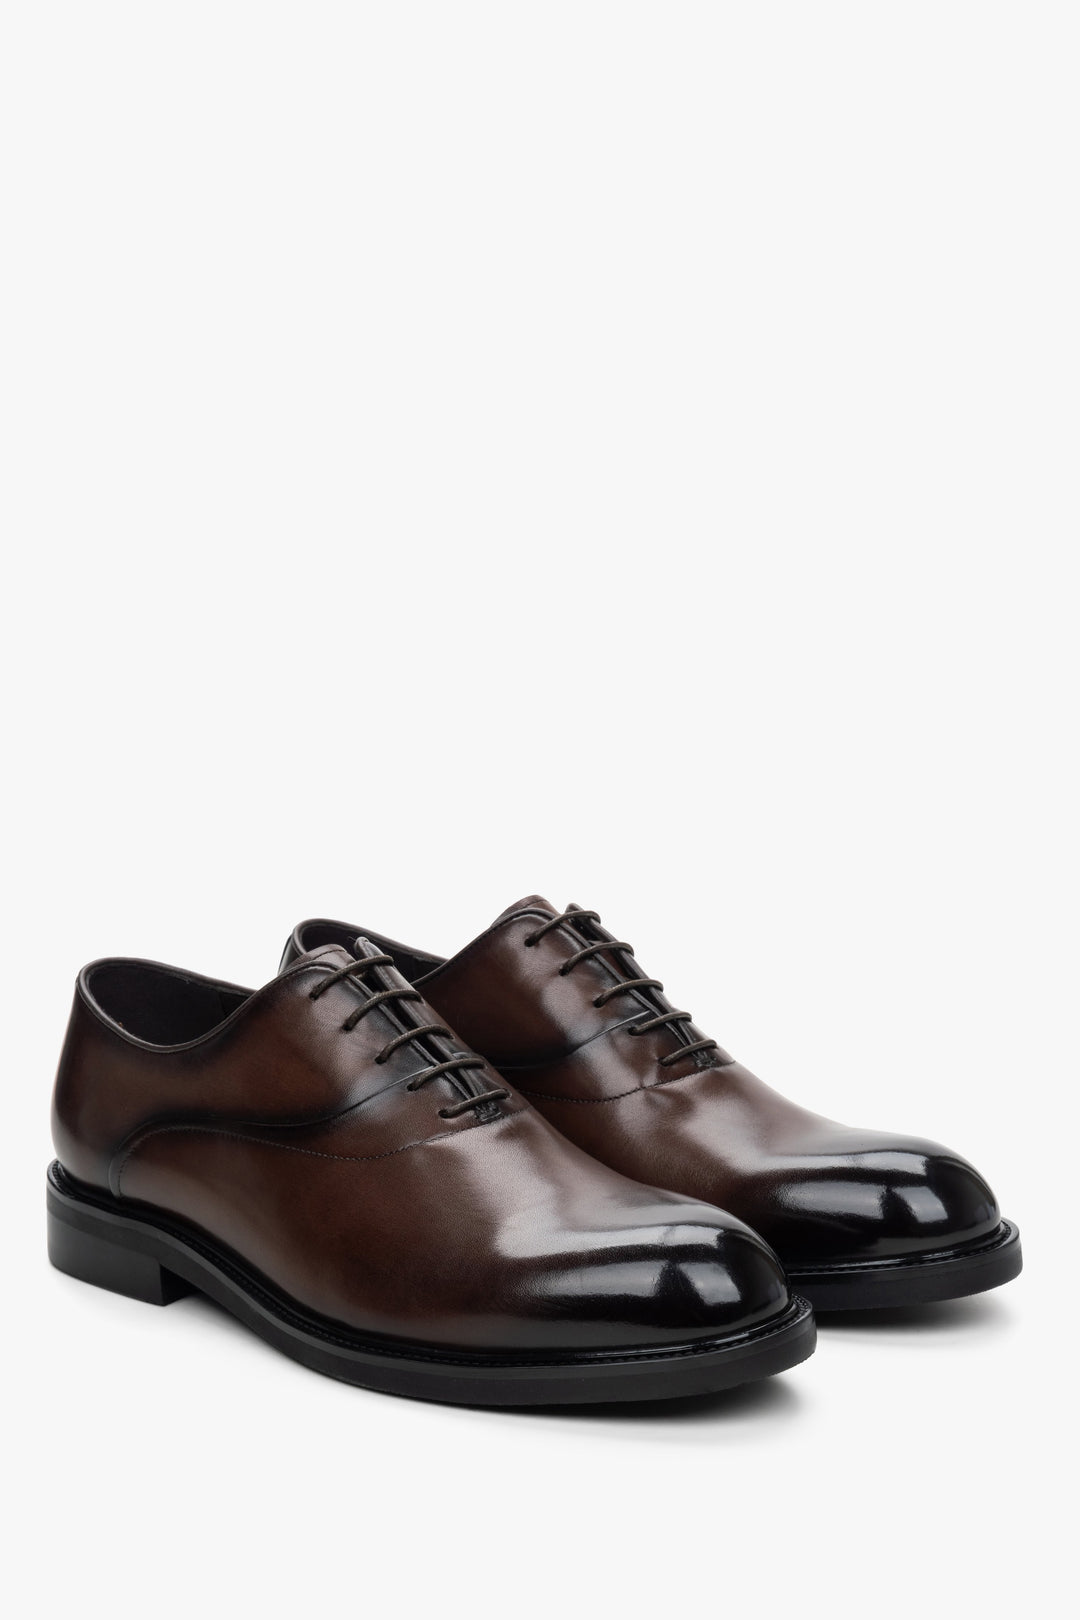 Lace-up men's Oxford shoes made of genuine leather by Estro in brown.